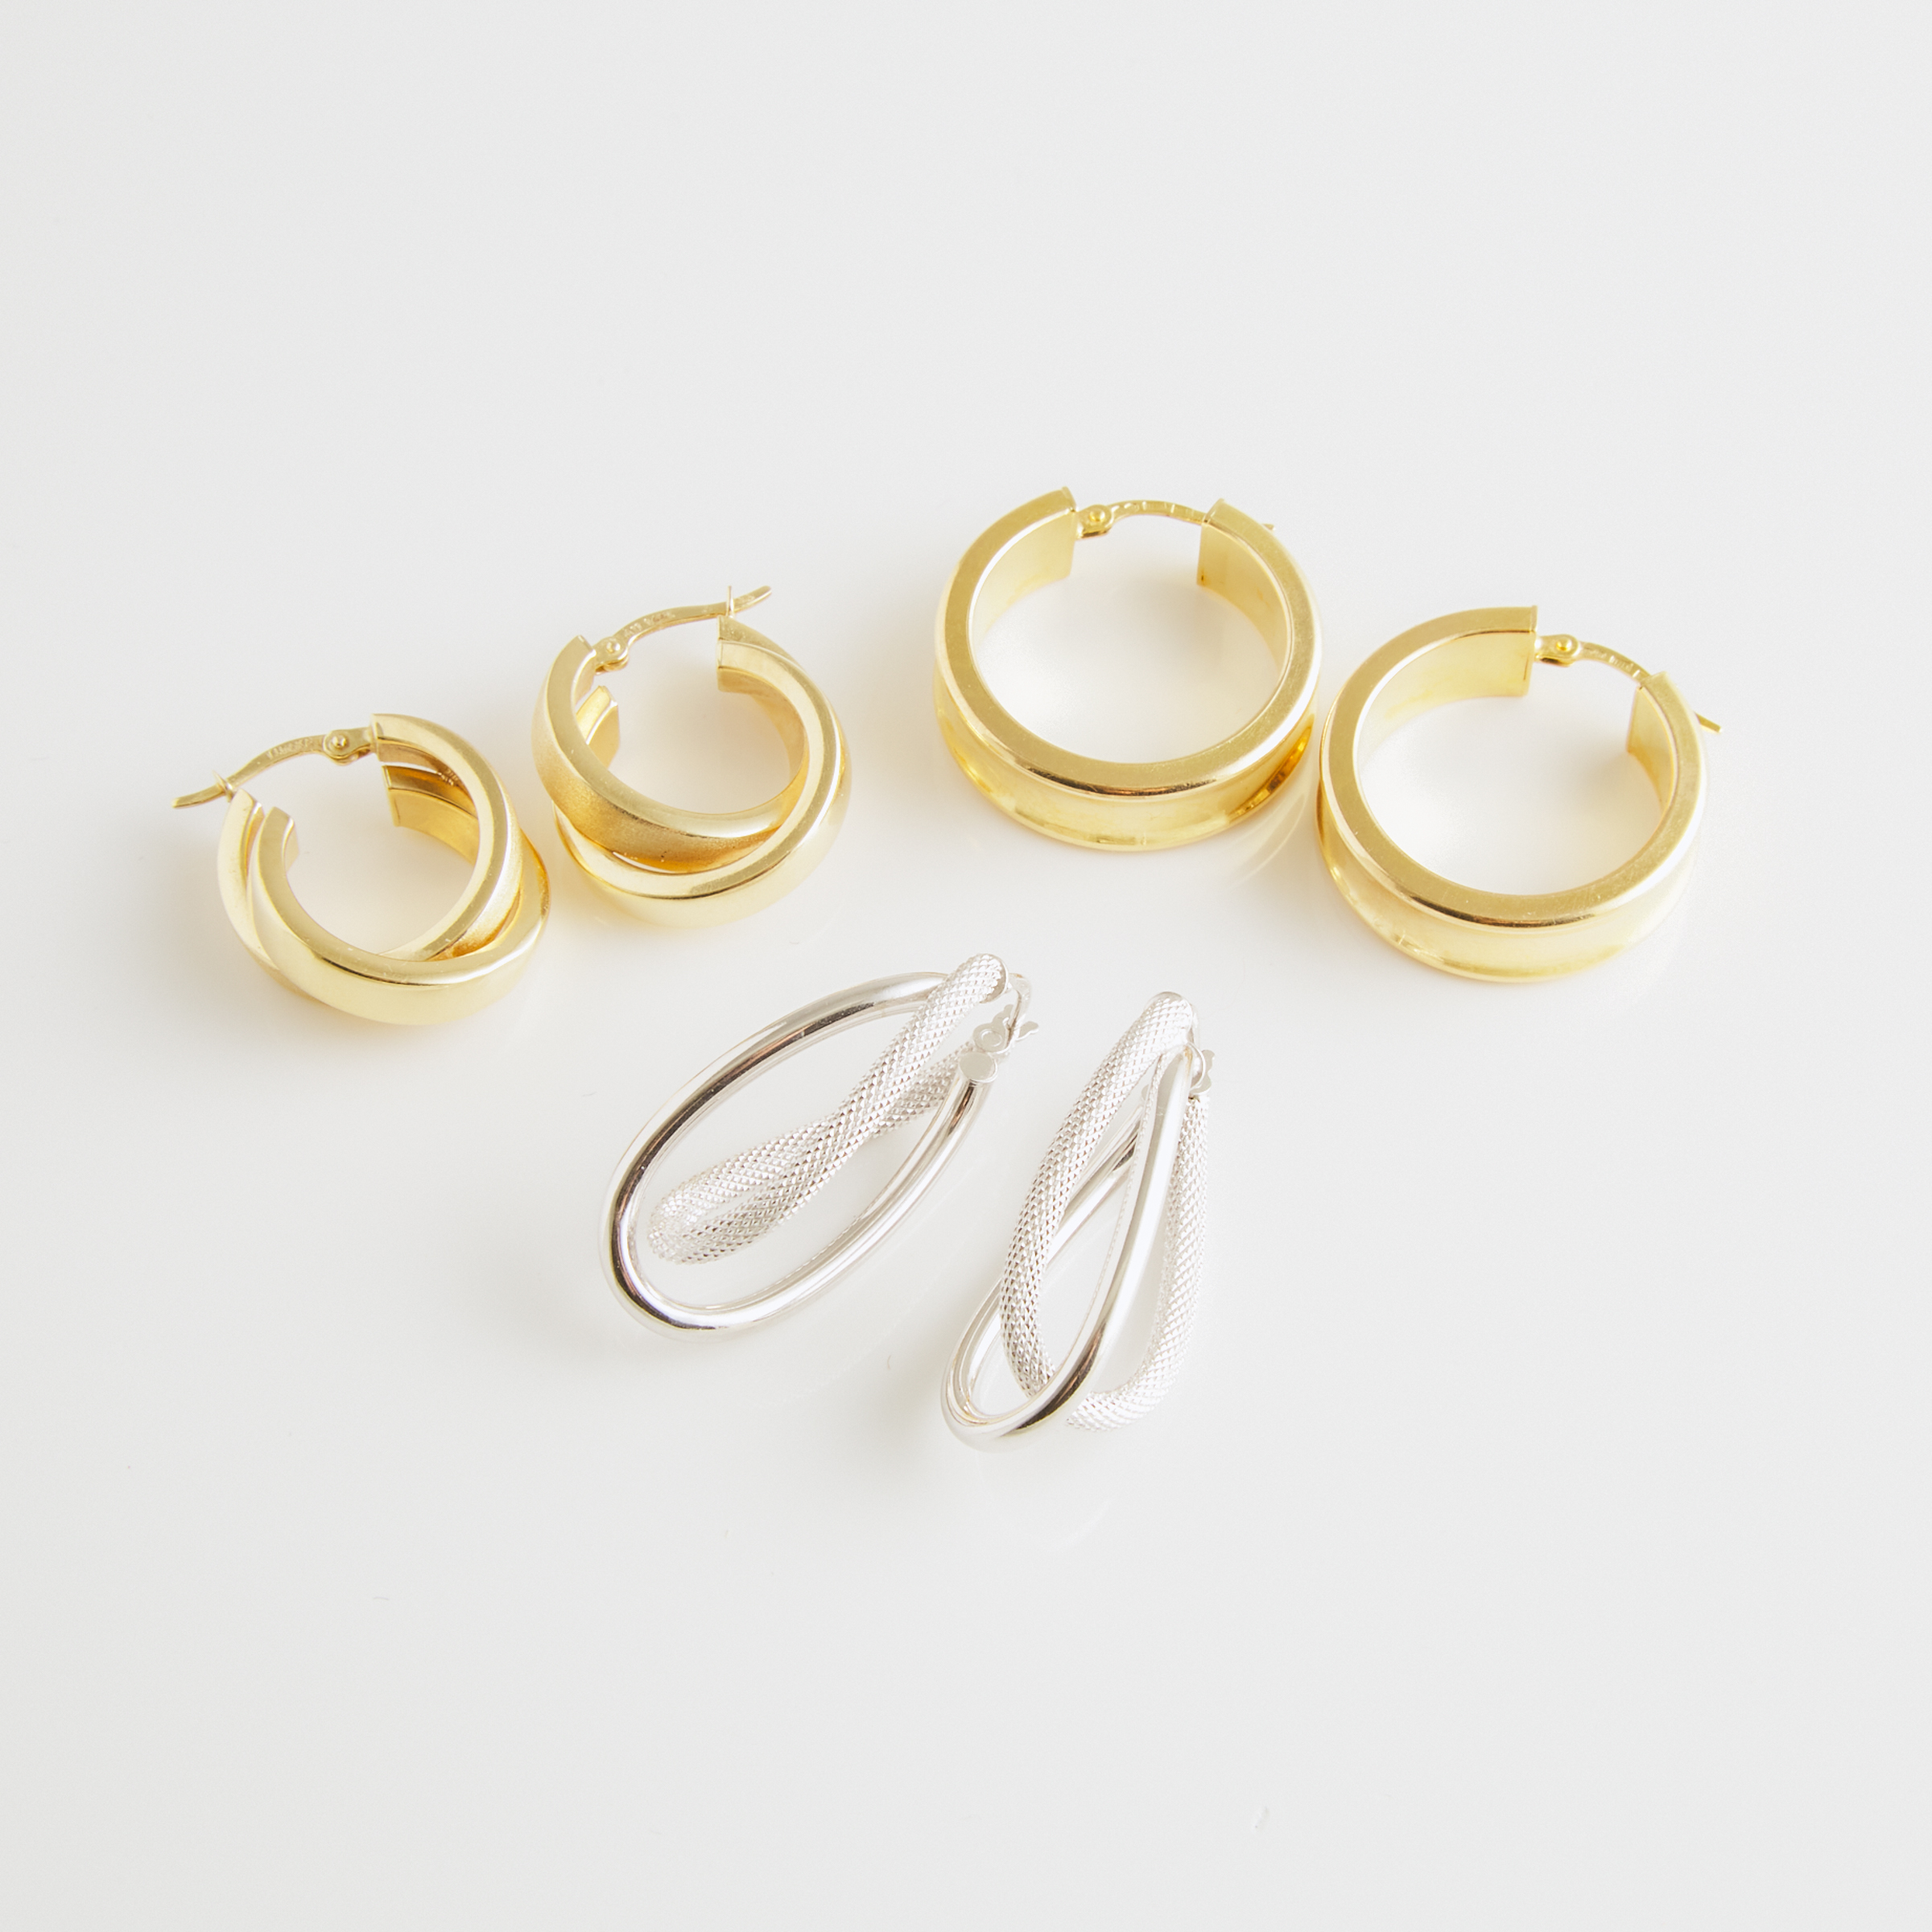 3 x 14k Yellow And White Gold Hoop Earrings